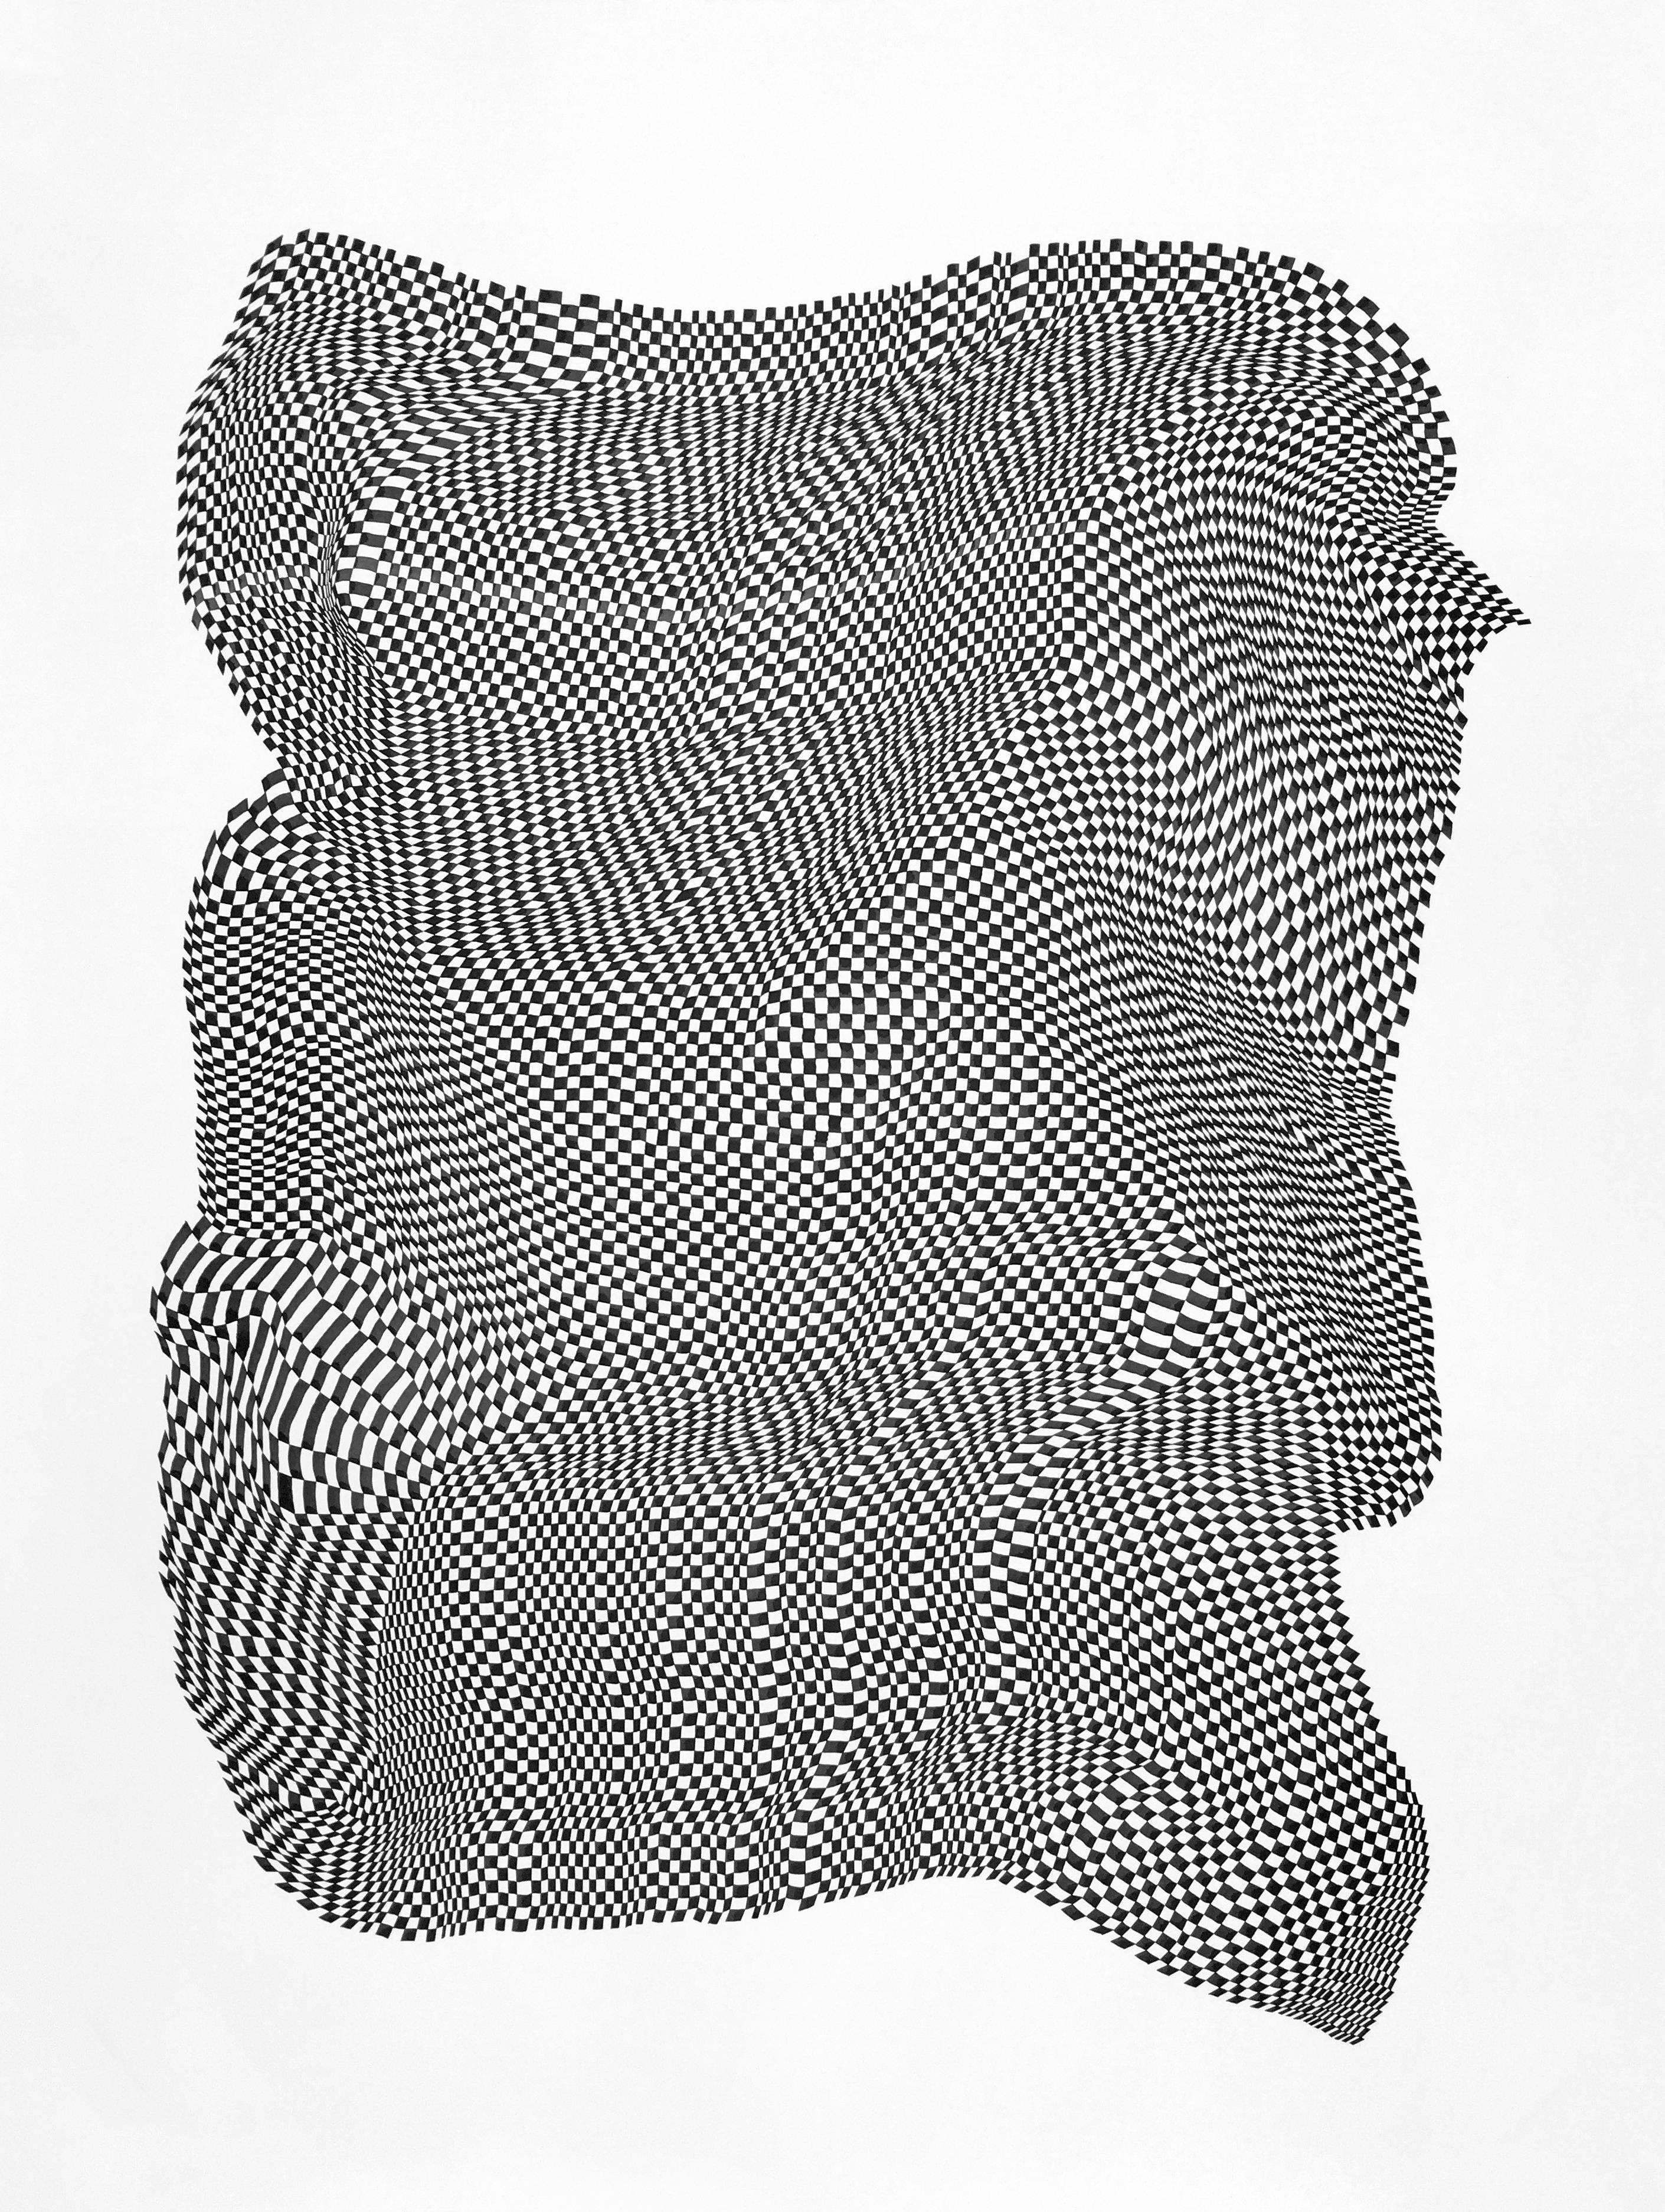 Dana Piazza Abstract Drawing - Squares 2- abstract geometric black and white ink drawing on paper